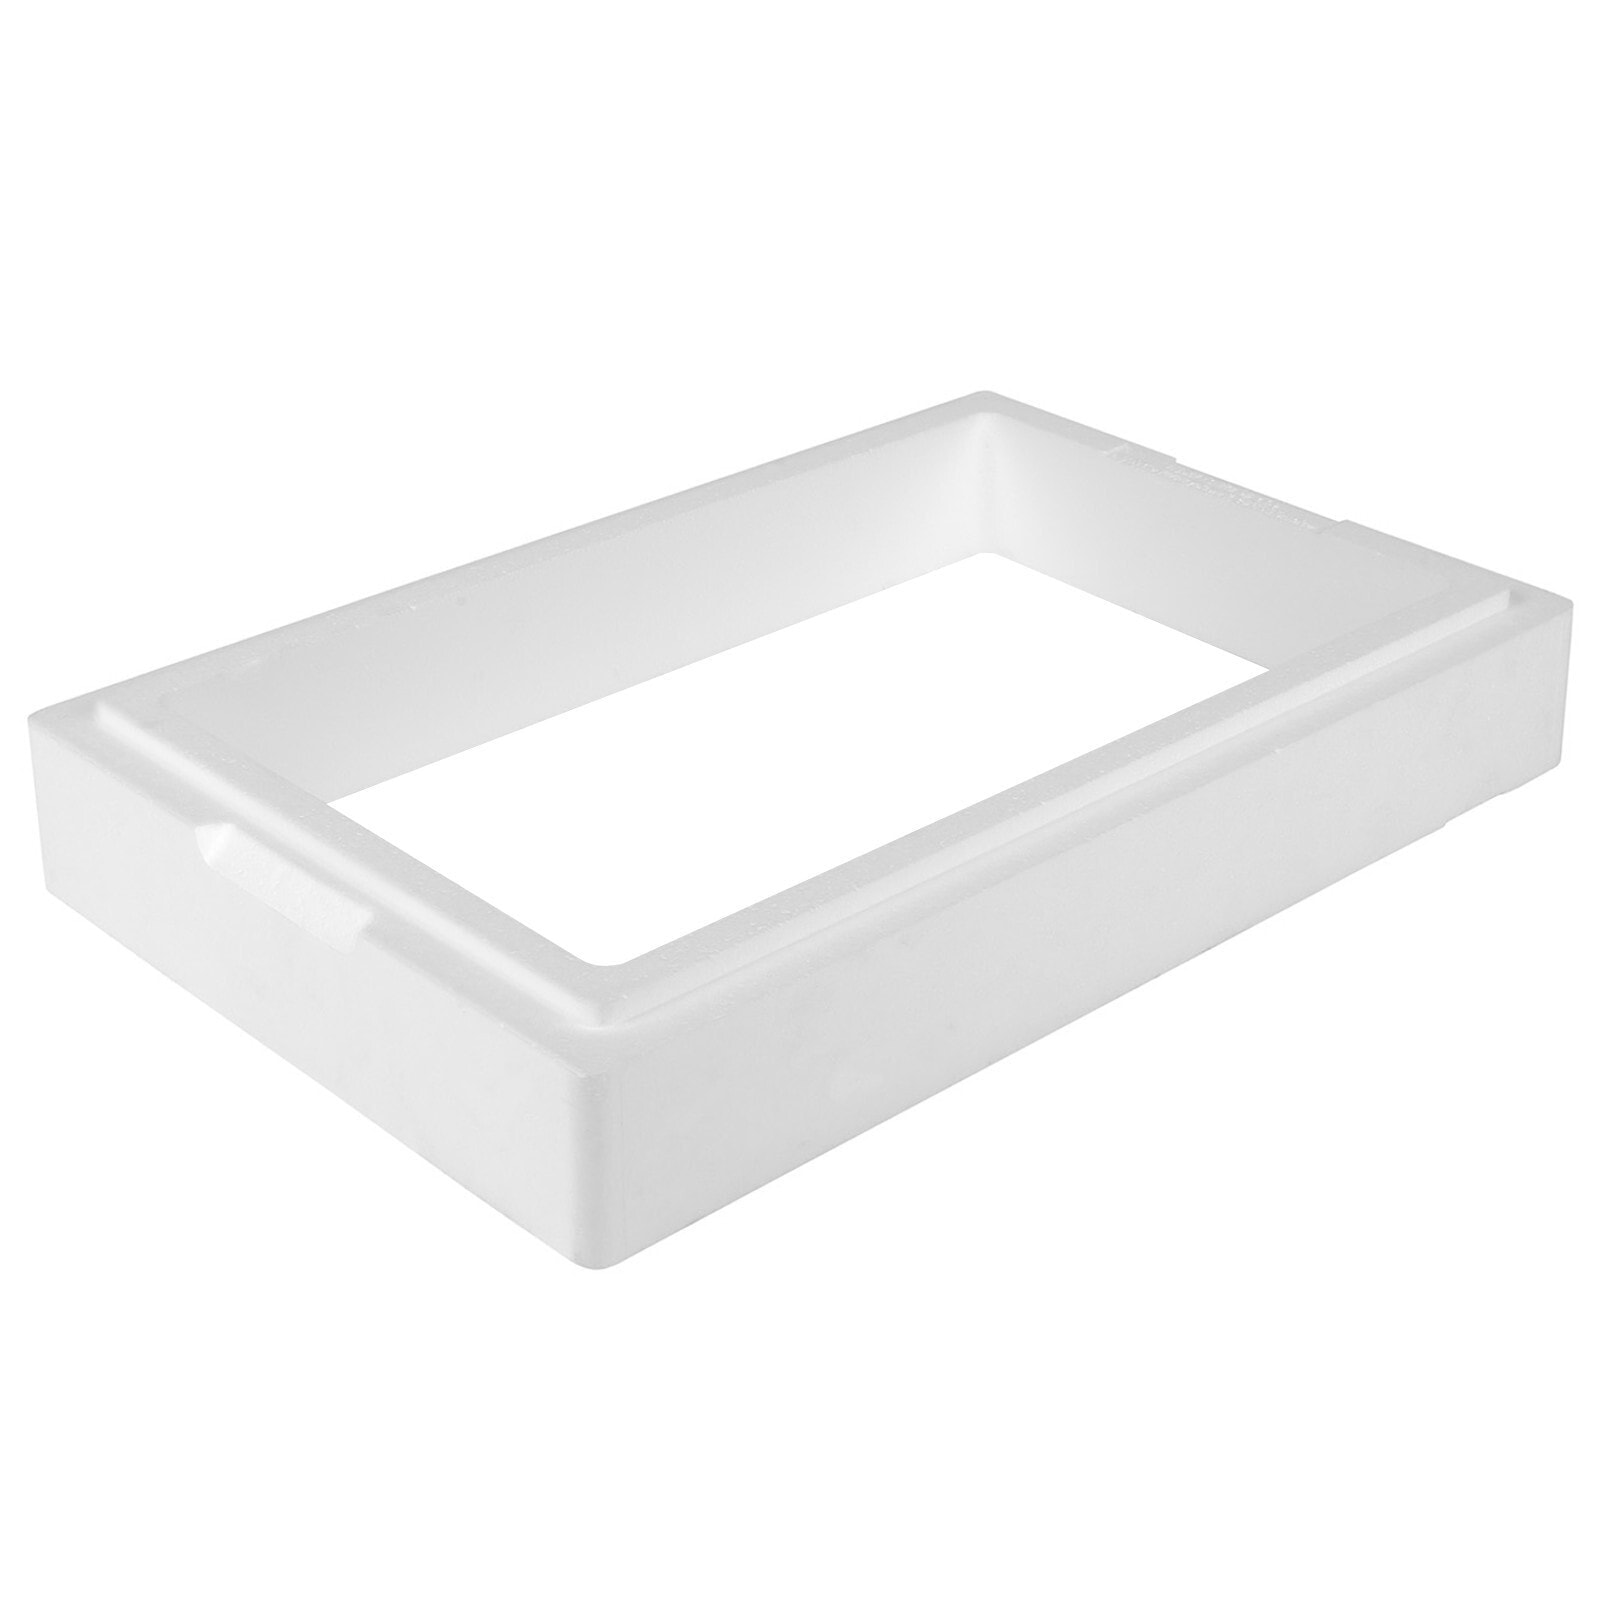 Magnifying ring for the thermobox of the thermal box made of polystyrene 580x380x90mm Arpack